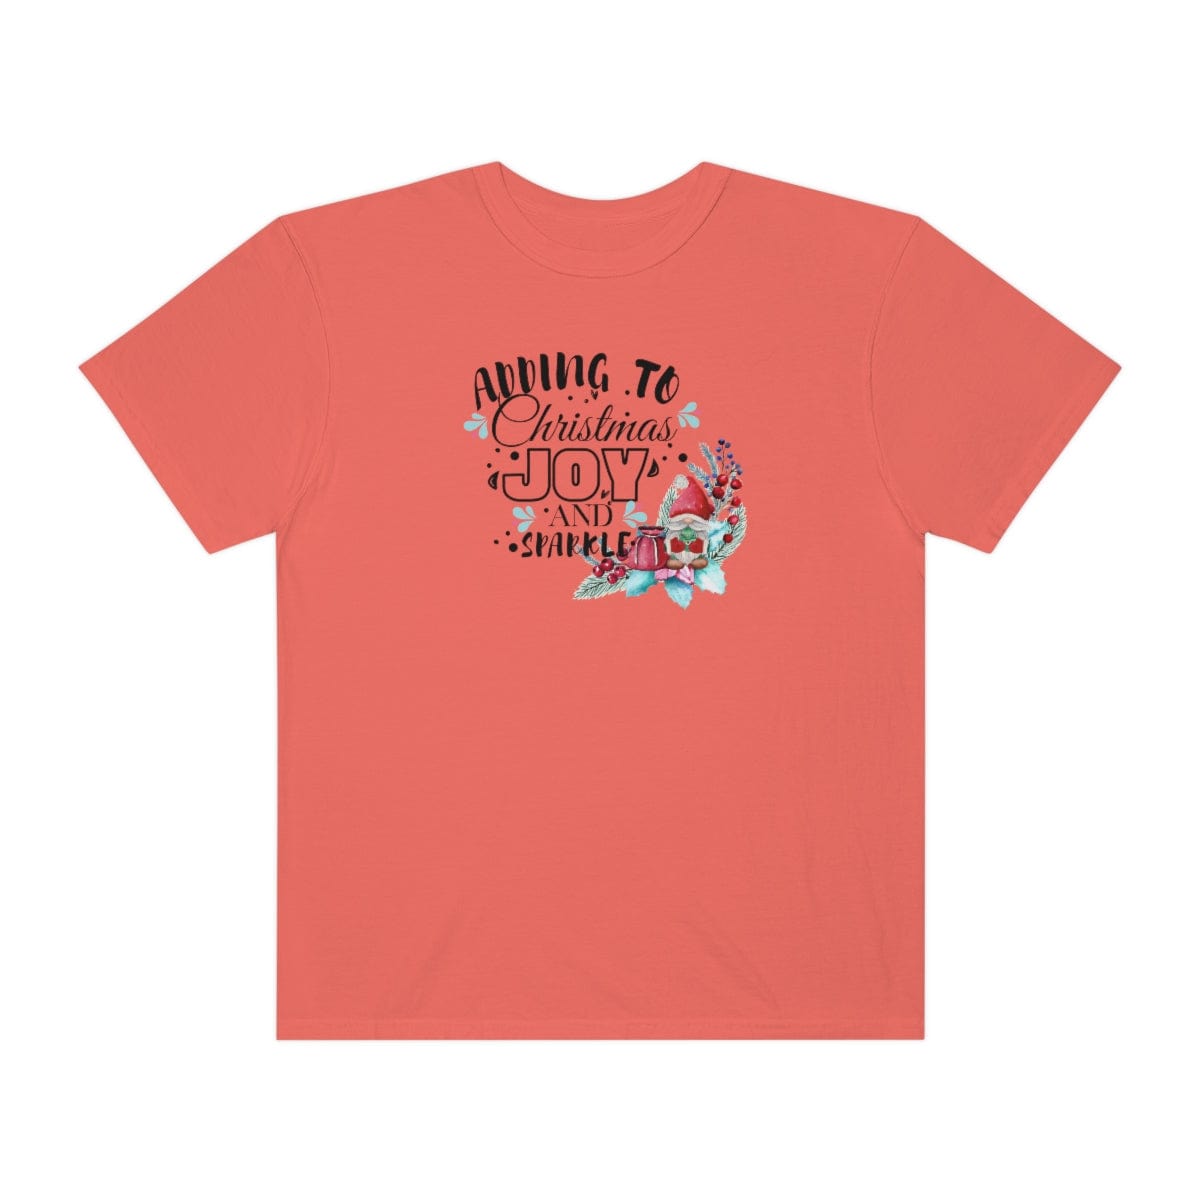 Adding To Christmas Joy And Sparkle T-Shirt For Women Girl